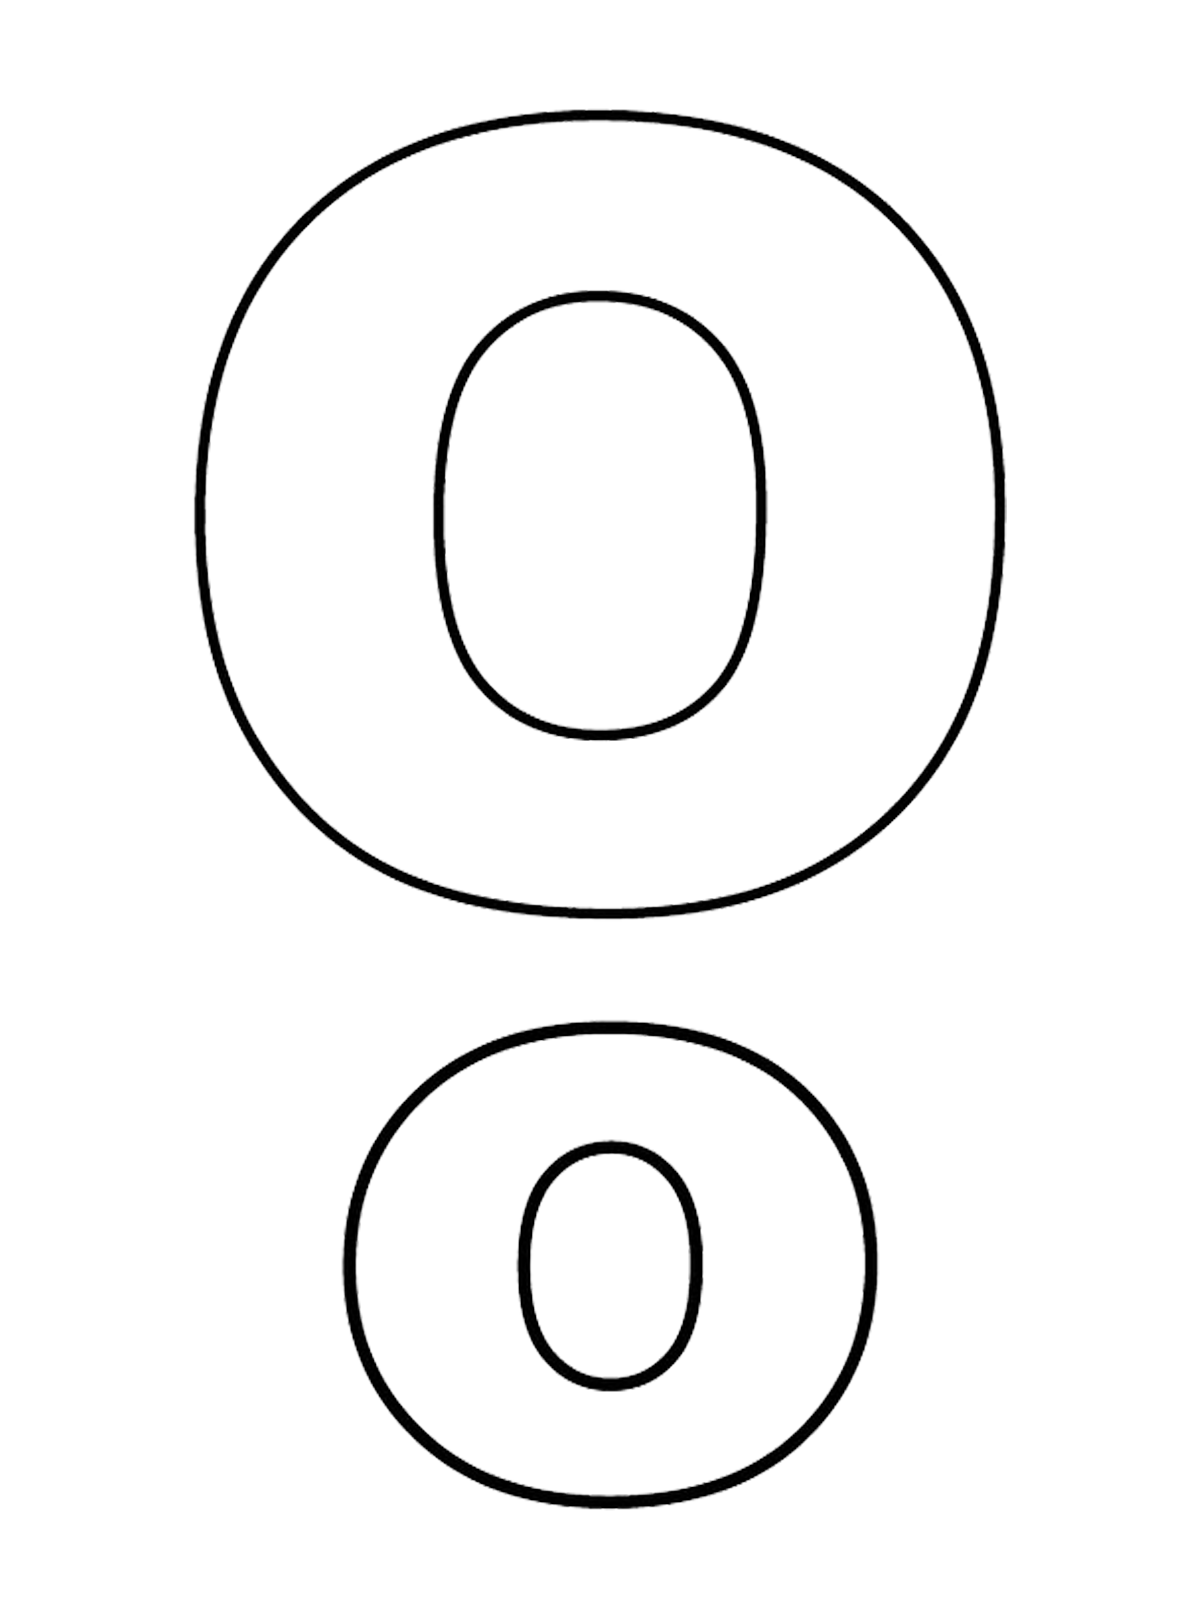 Letters and numbers - Letter O capital letters and lowercase